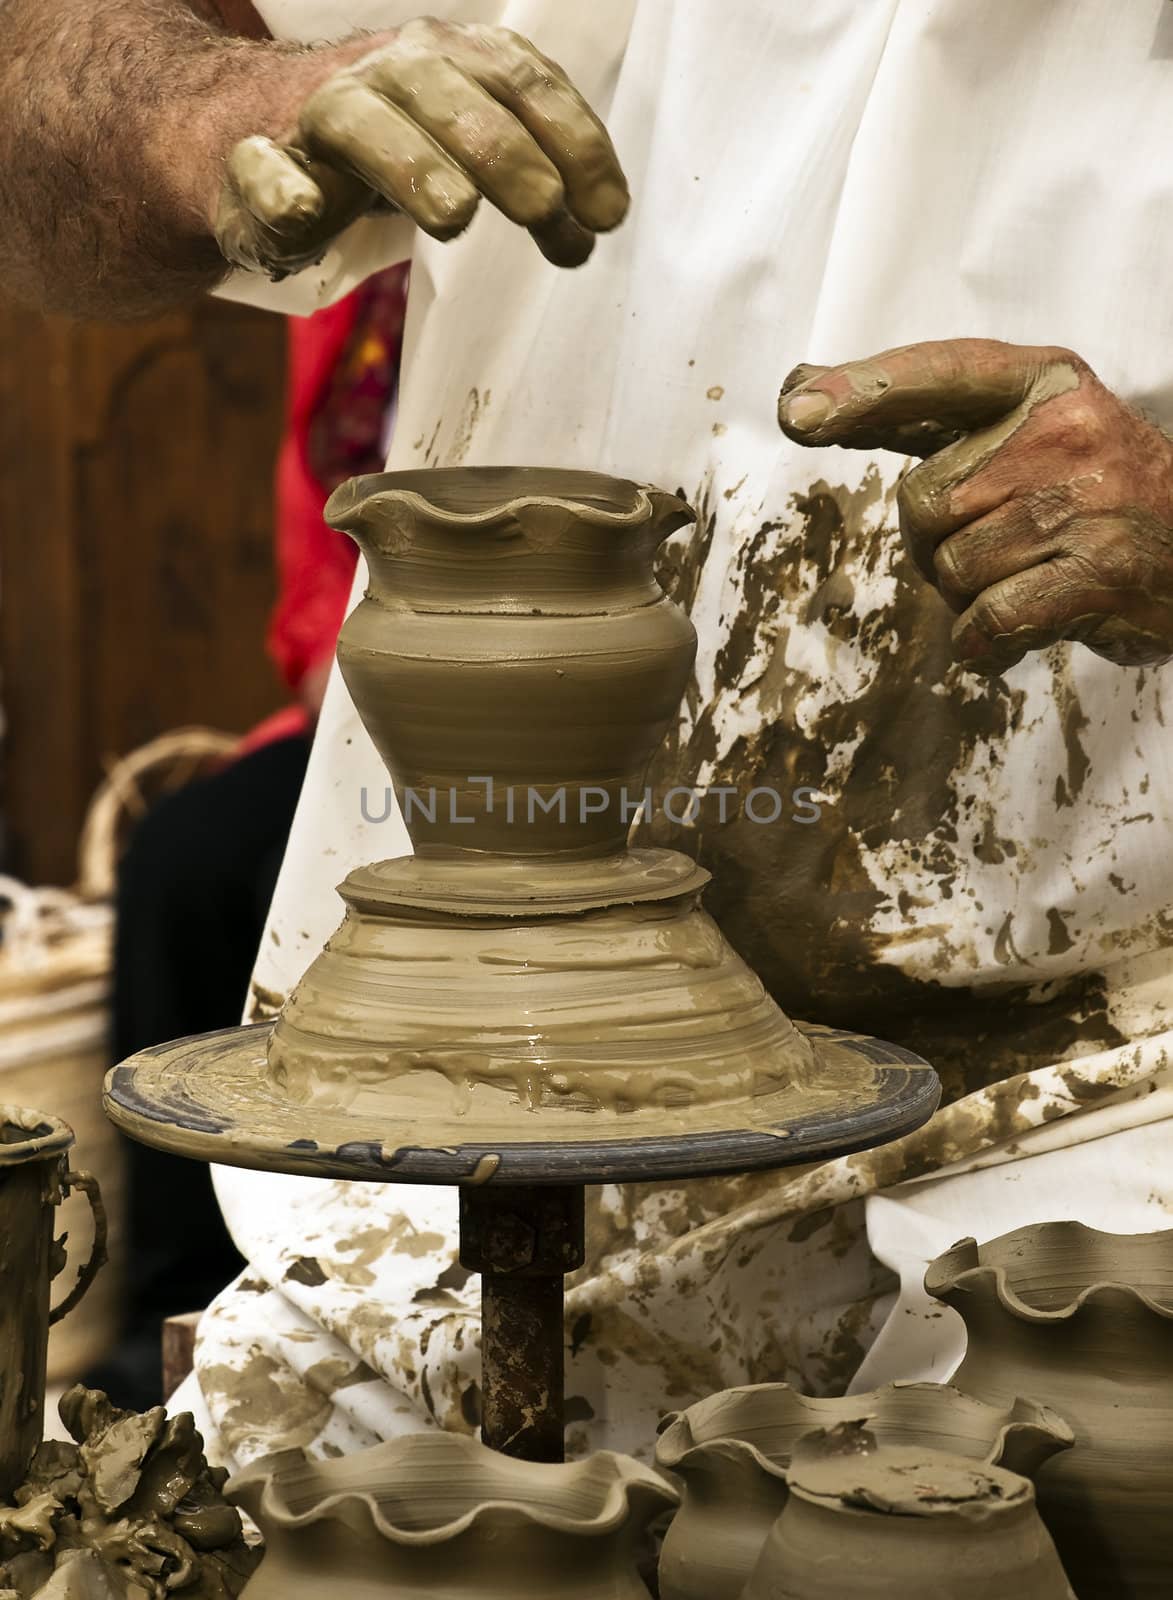 Potter at Work by PhotoWorks